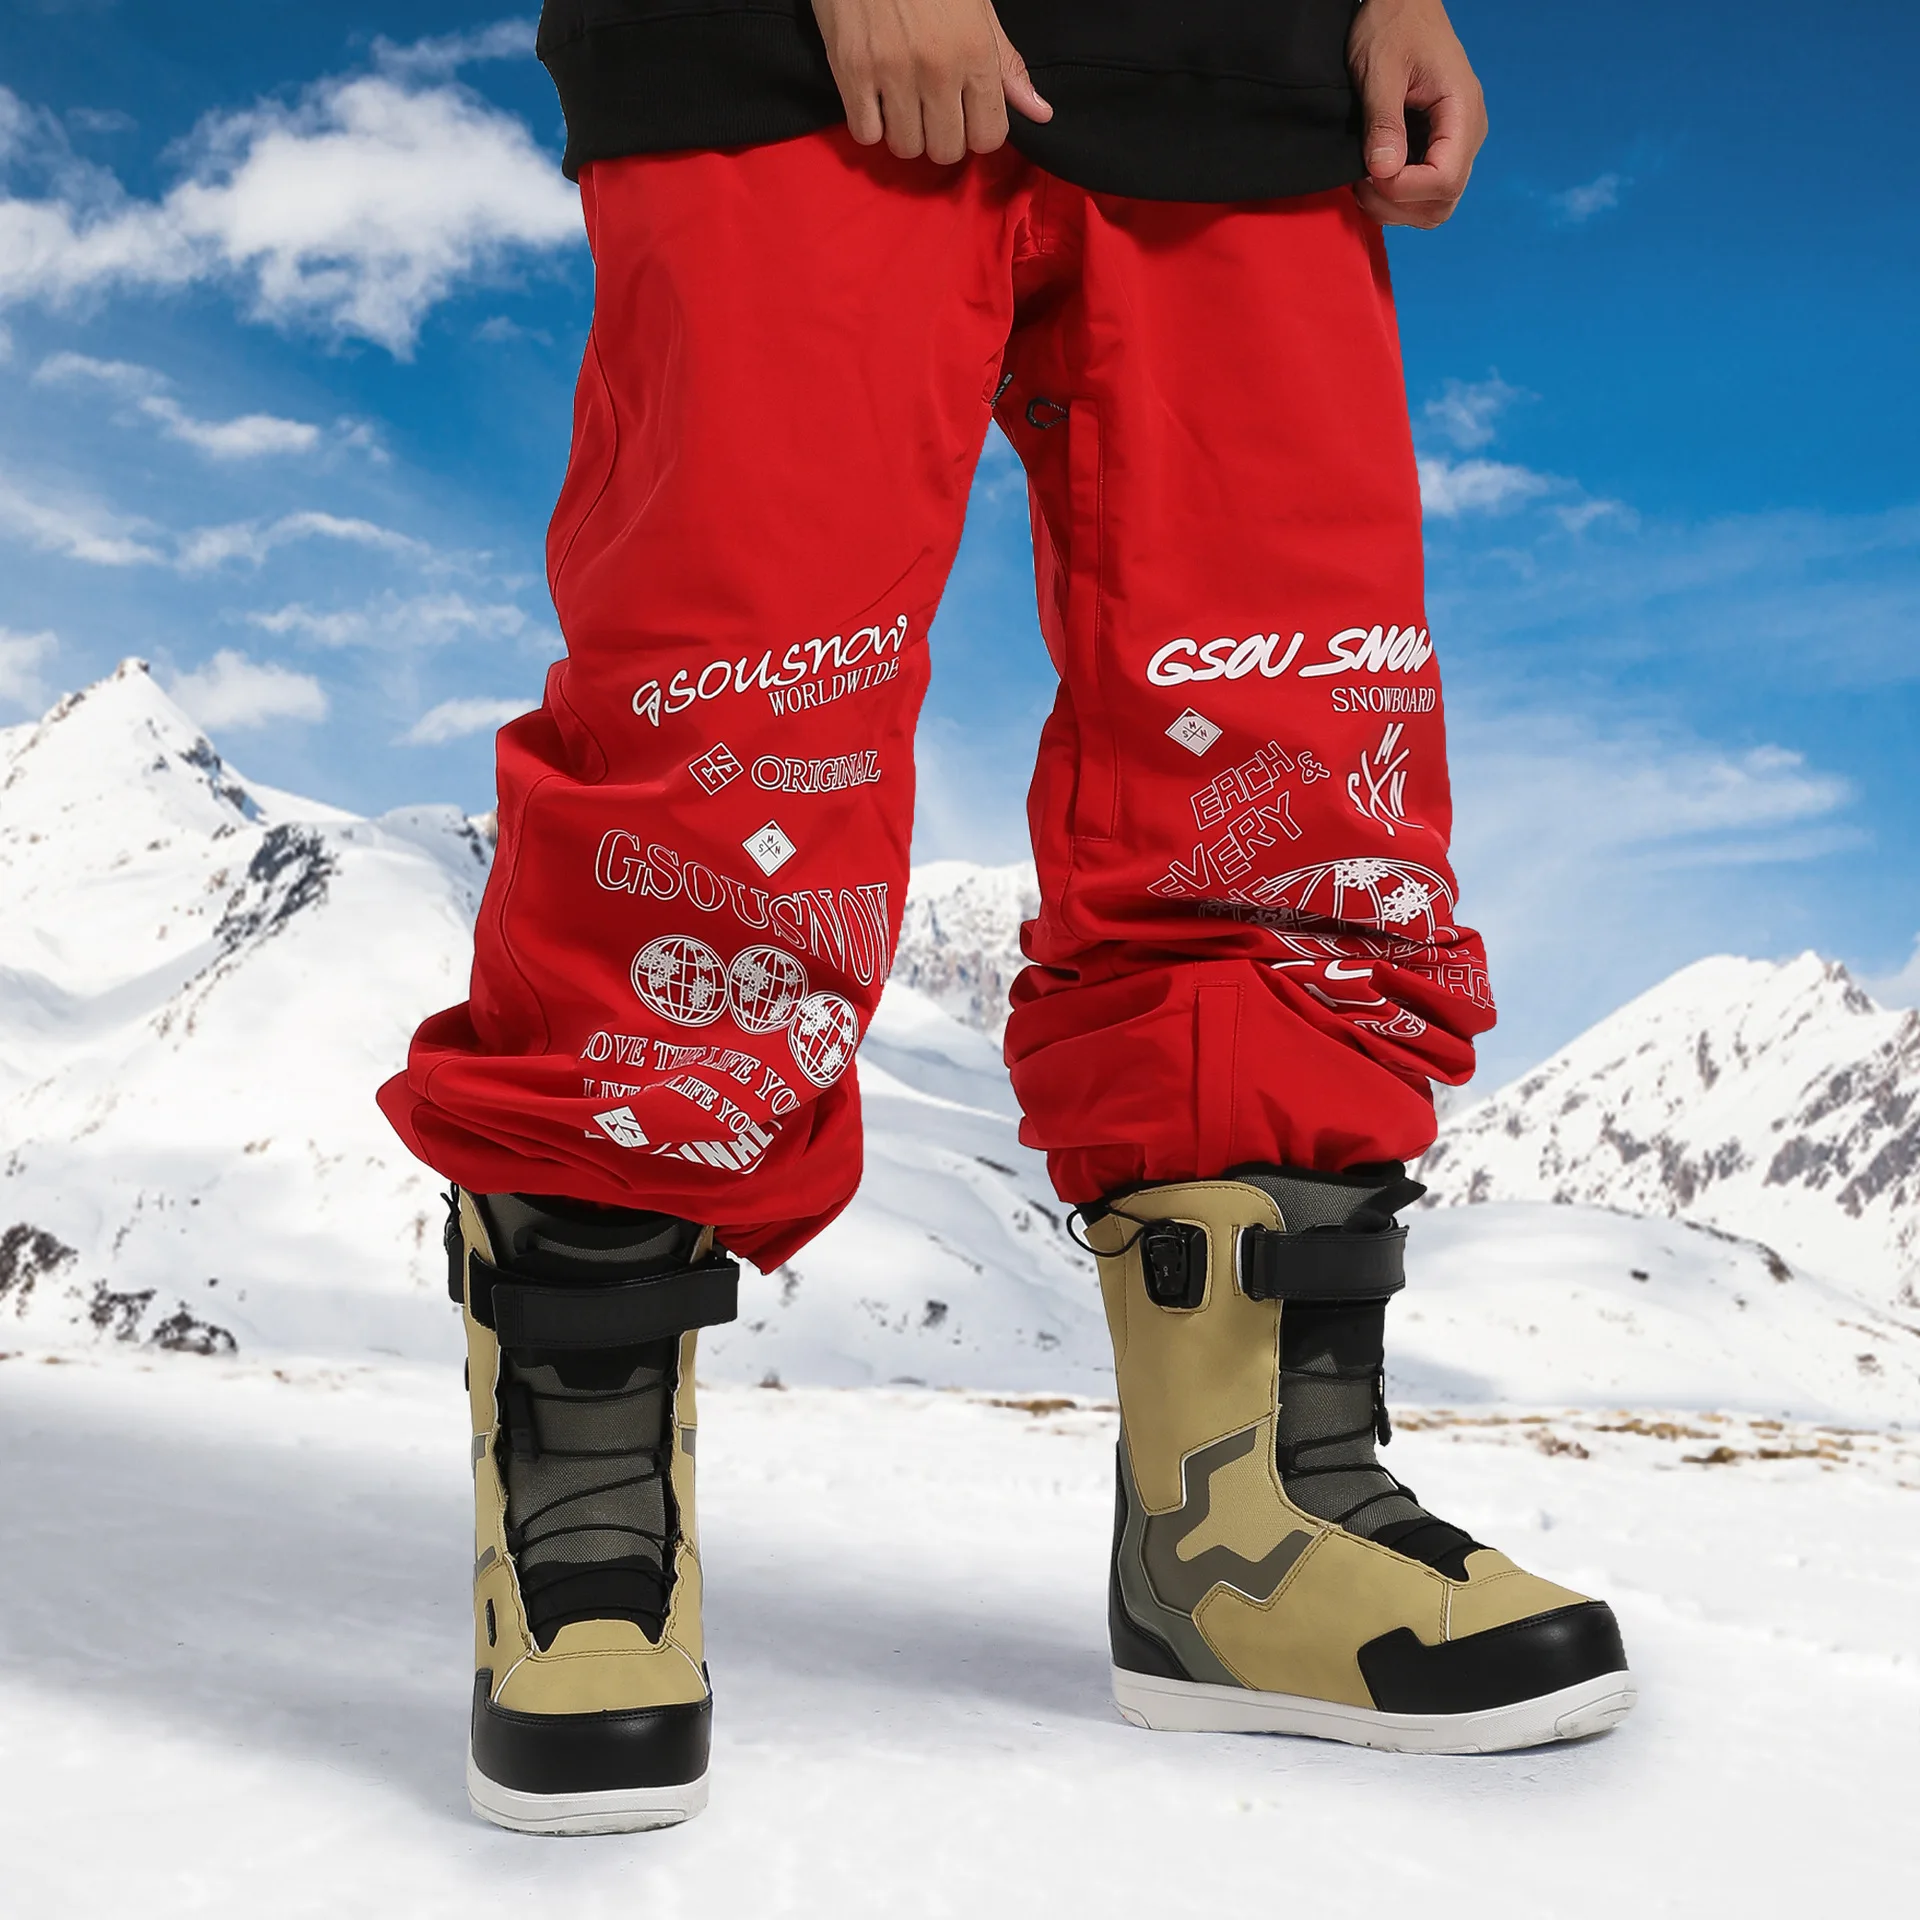 

Men and Women's Patchwork Multiple Pockets Ski Pants, Windproof Snowpants, Waterproof Snowboard Pants, Female and Male Skiing Tr